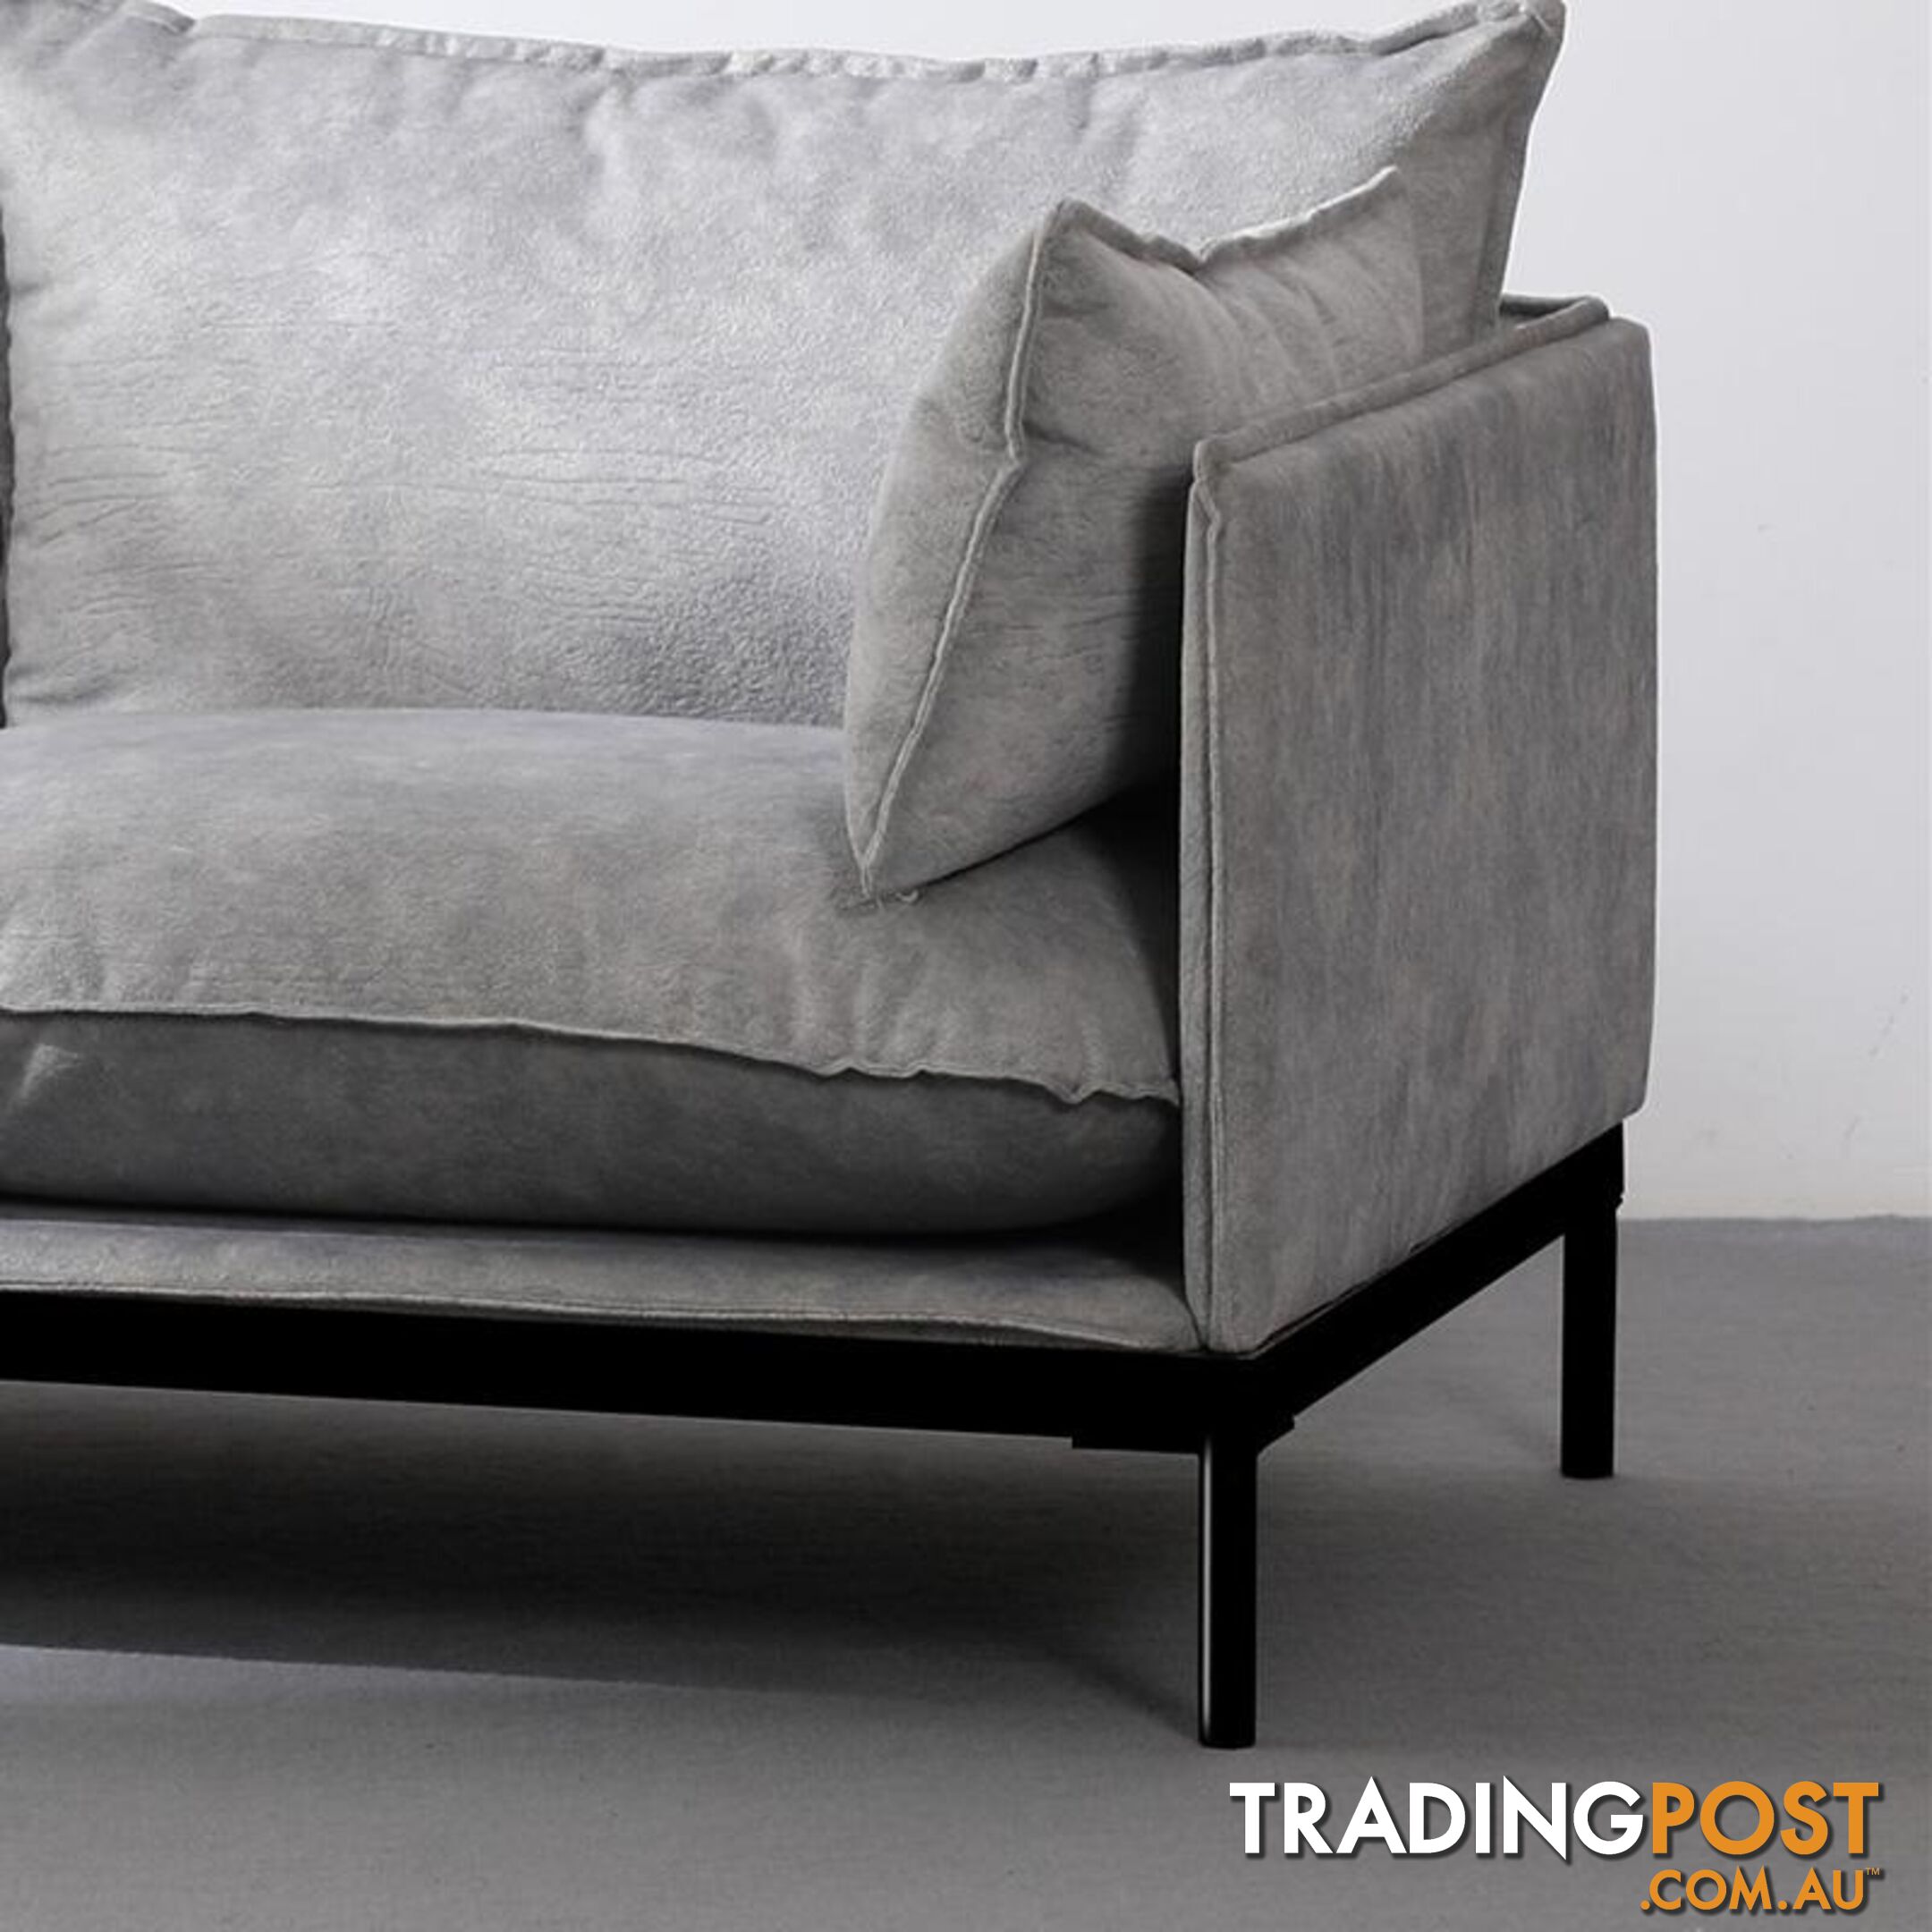 SINCLAIR Single Seater Sofa in Grey - BB-S005-GY - 9334719011066